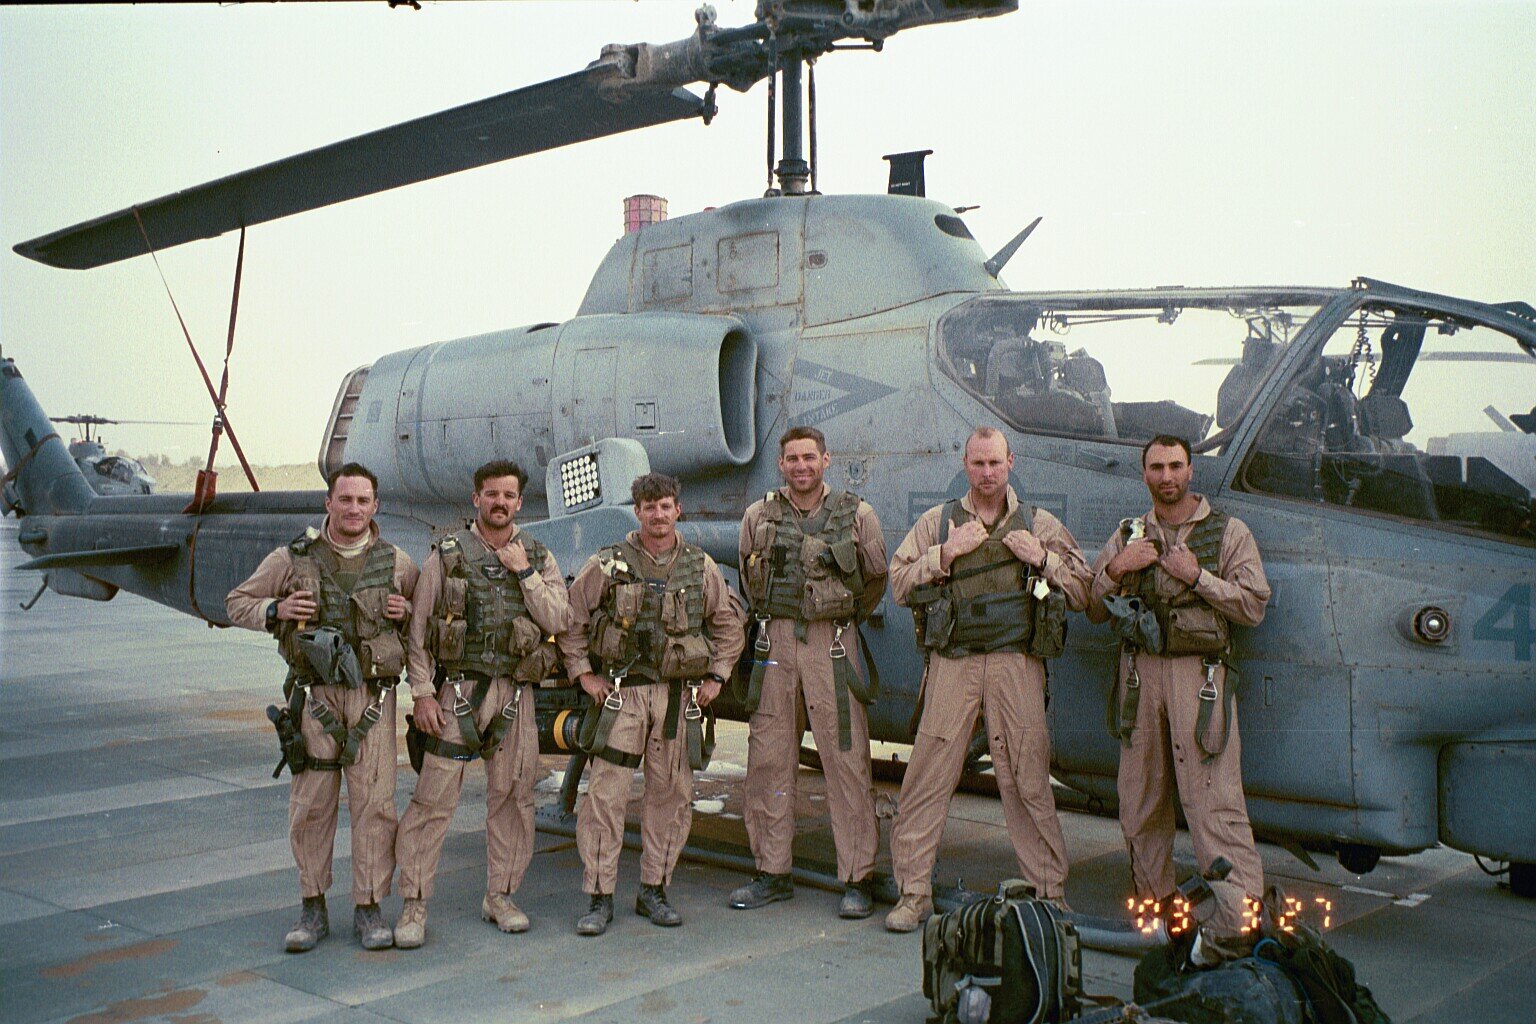 Taken shortly after we finally made it back to Kuwait after the long sandstorm, 27 March 2003. From left to right: Weasel, Shoe, Gash, BT, Fuse, IKE. Missing are Spock and JoJo–still in Iraq after being shot down during the final mission of those four days. It would be several more days before maintenance Marines could repair all the damage and make their aircraft flyable again. pg 210